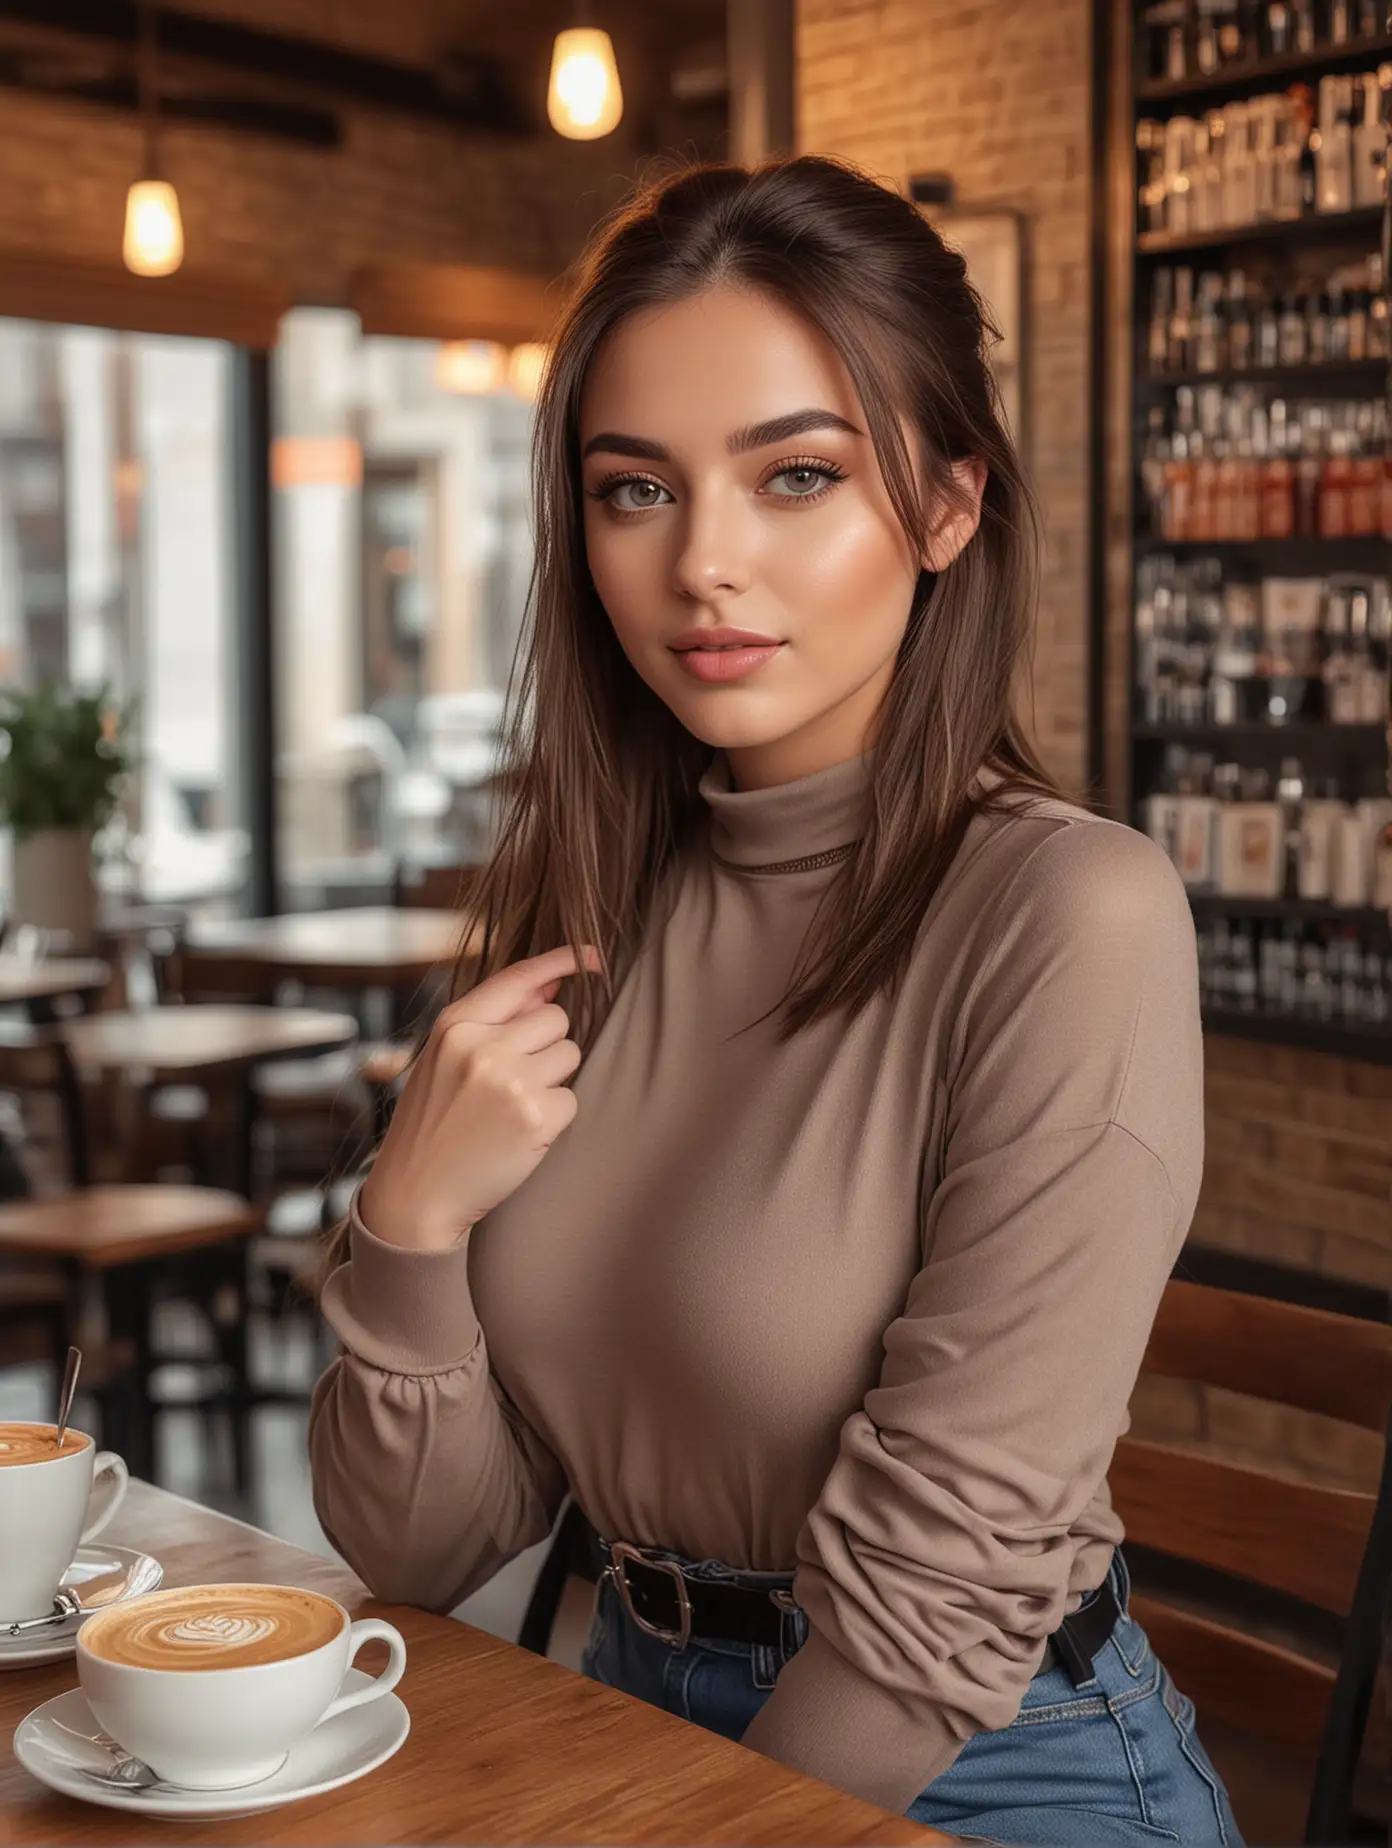 Stylish American Girl Poses in Cafe with Exquisite Makeup